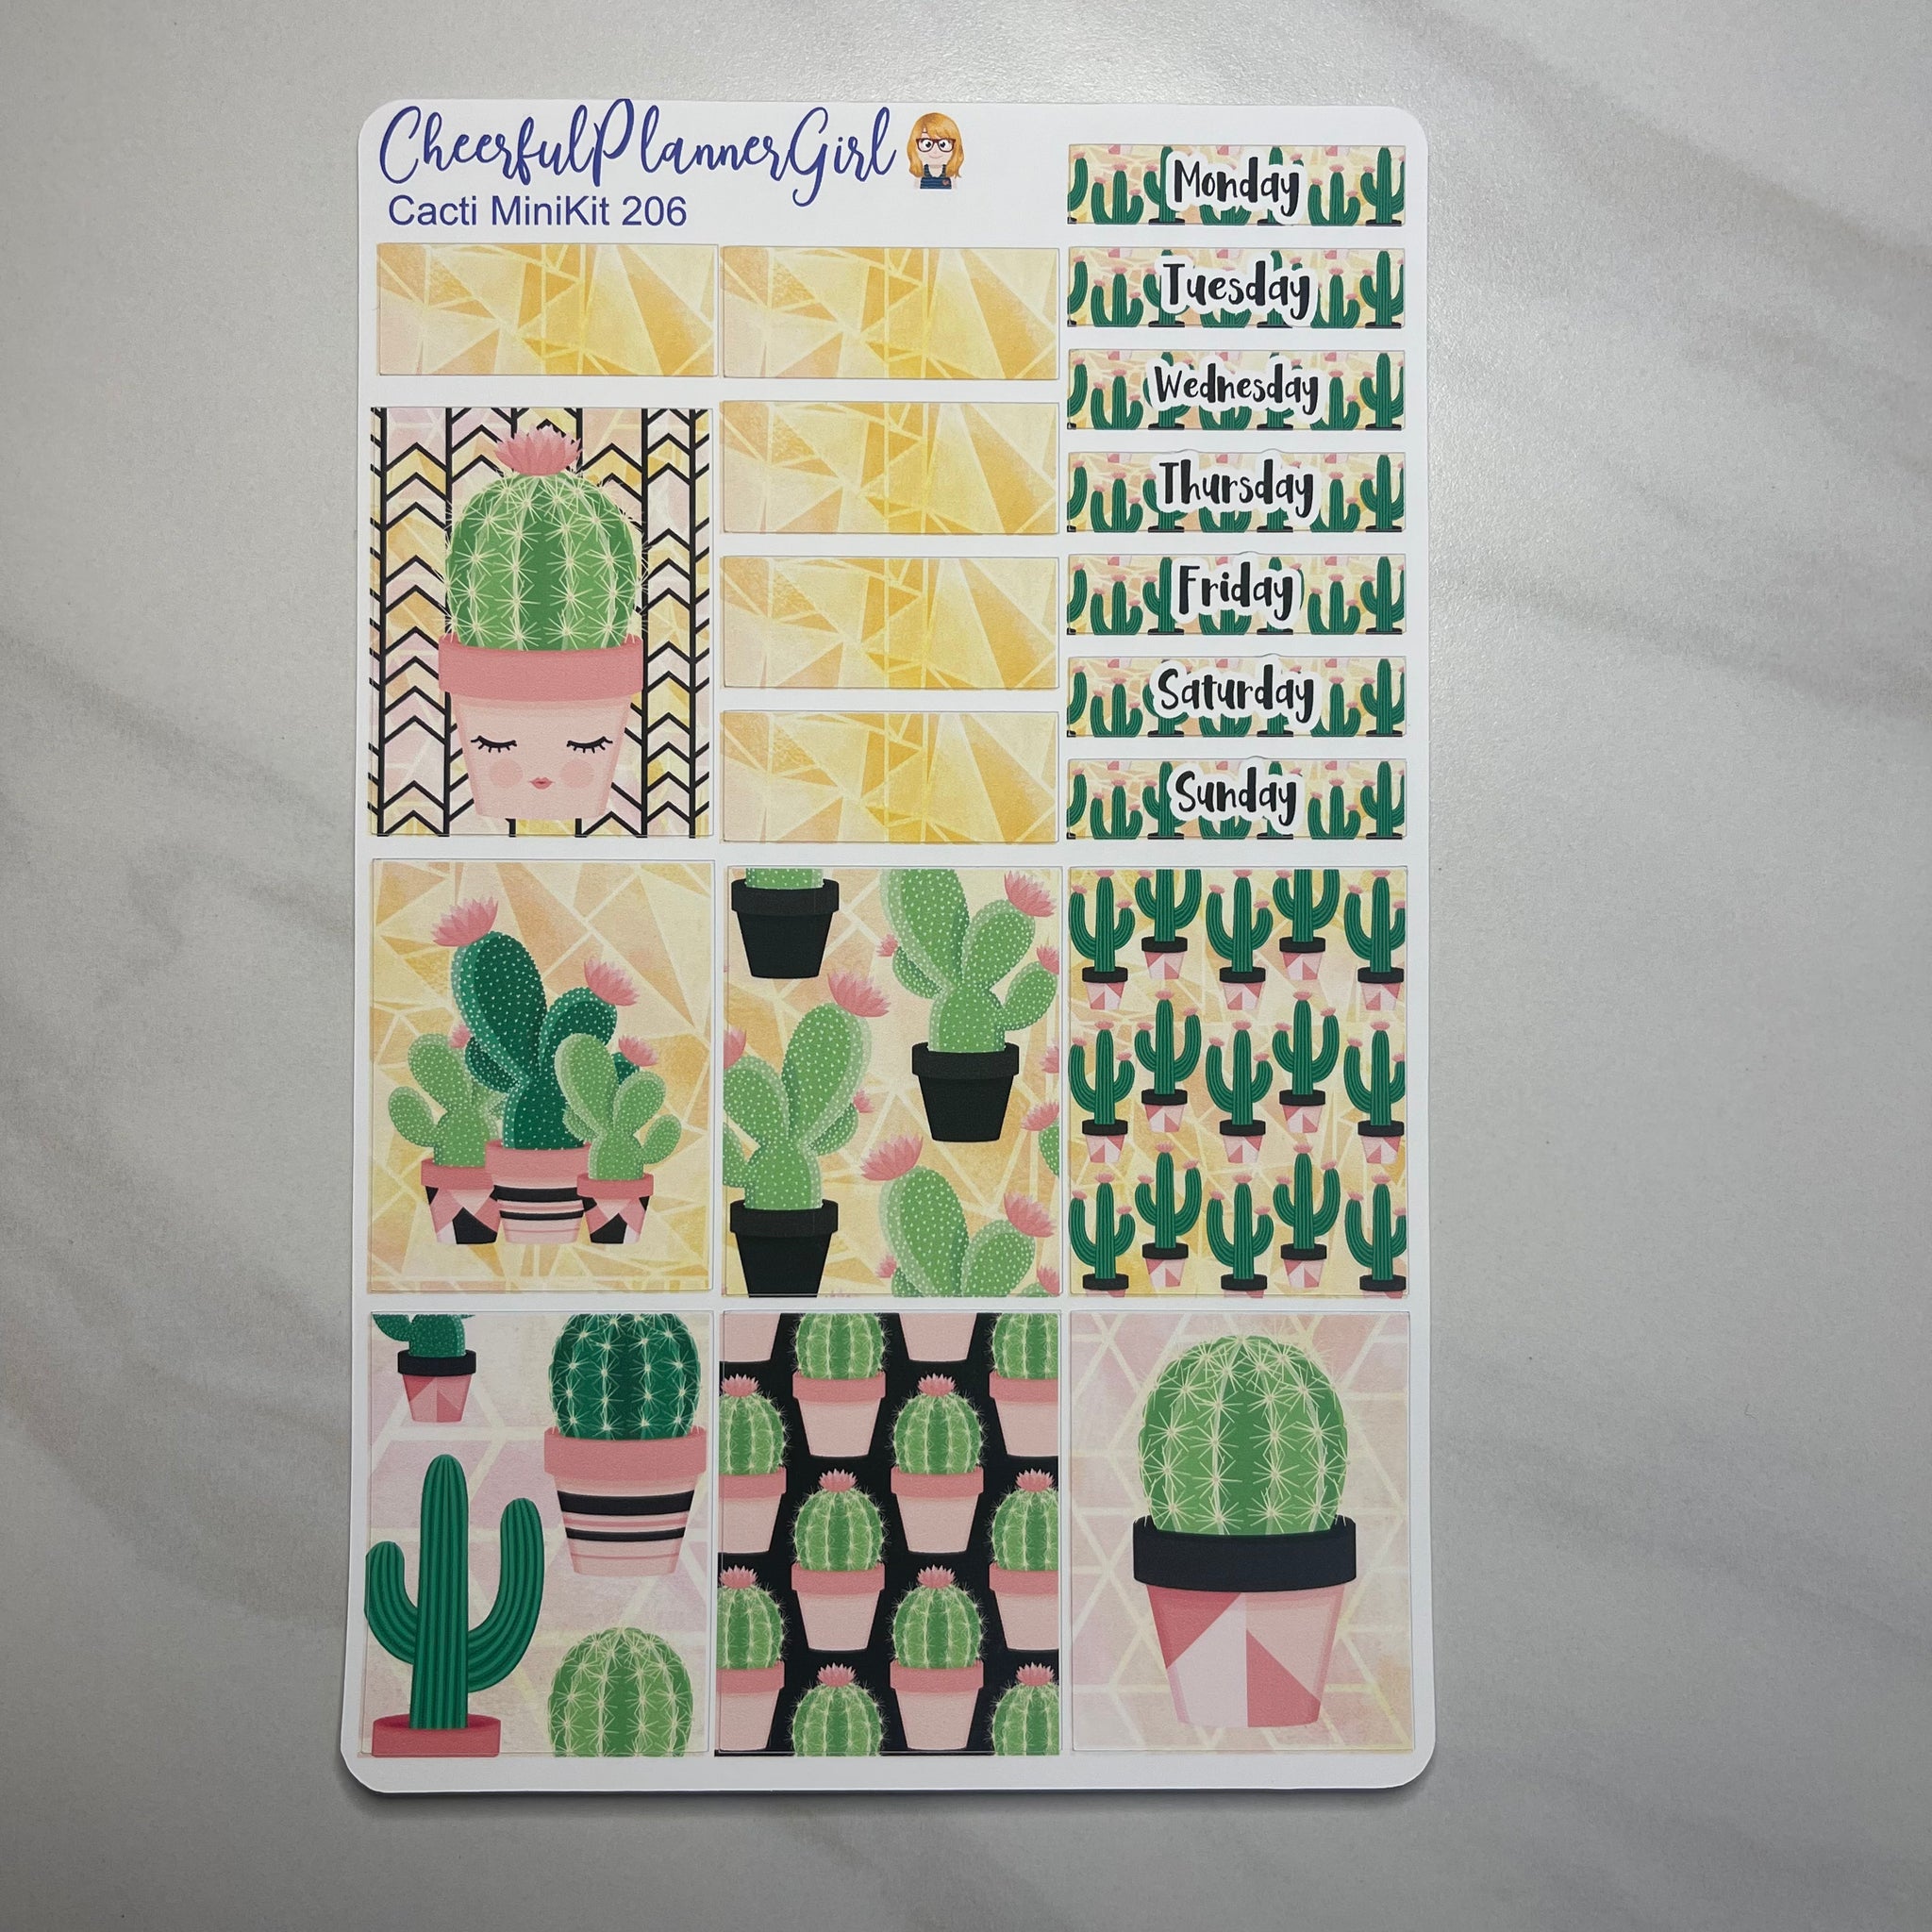 Cactus Cacti Mini Kit Weekly Layout Planner Stickers